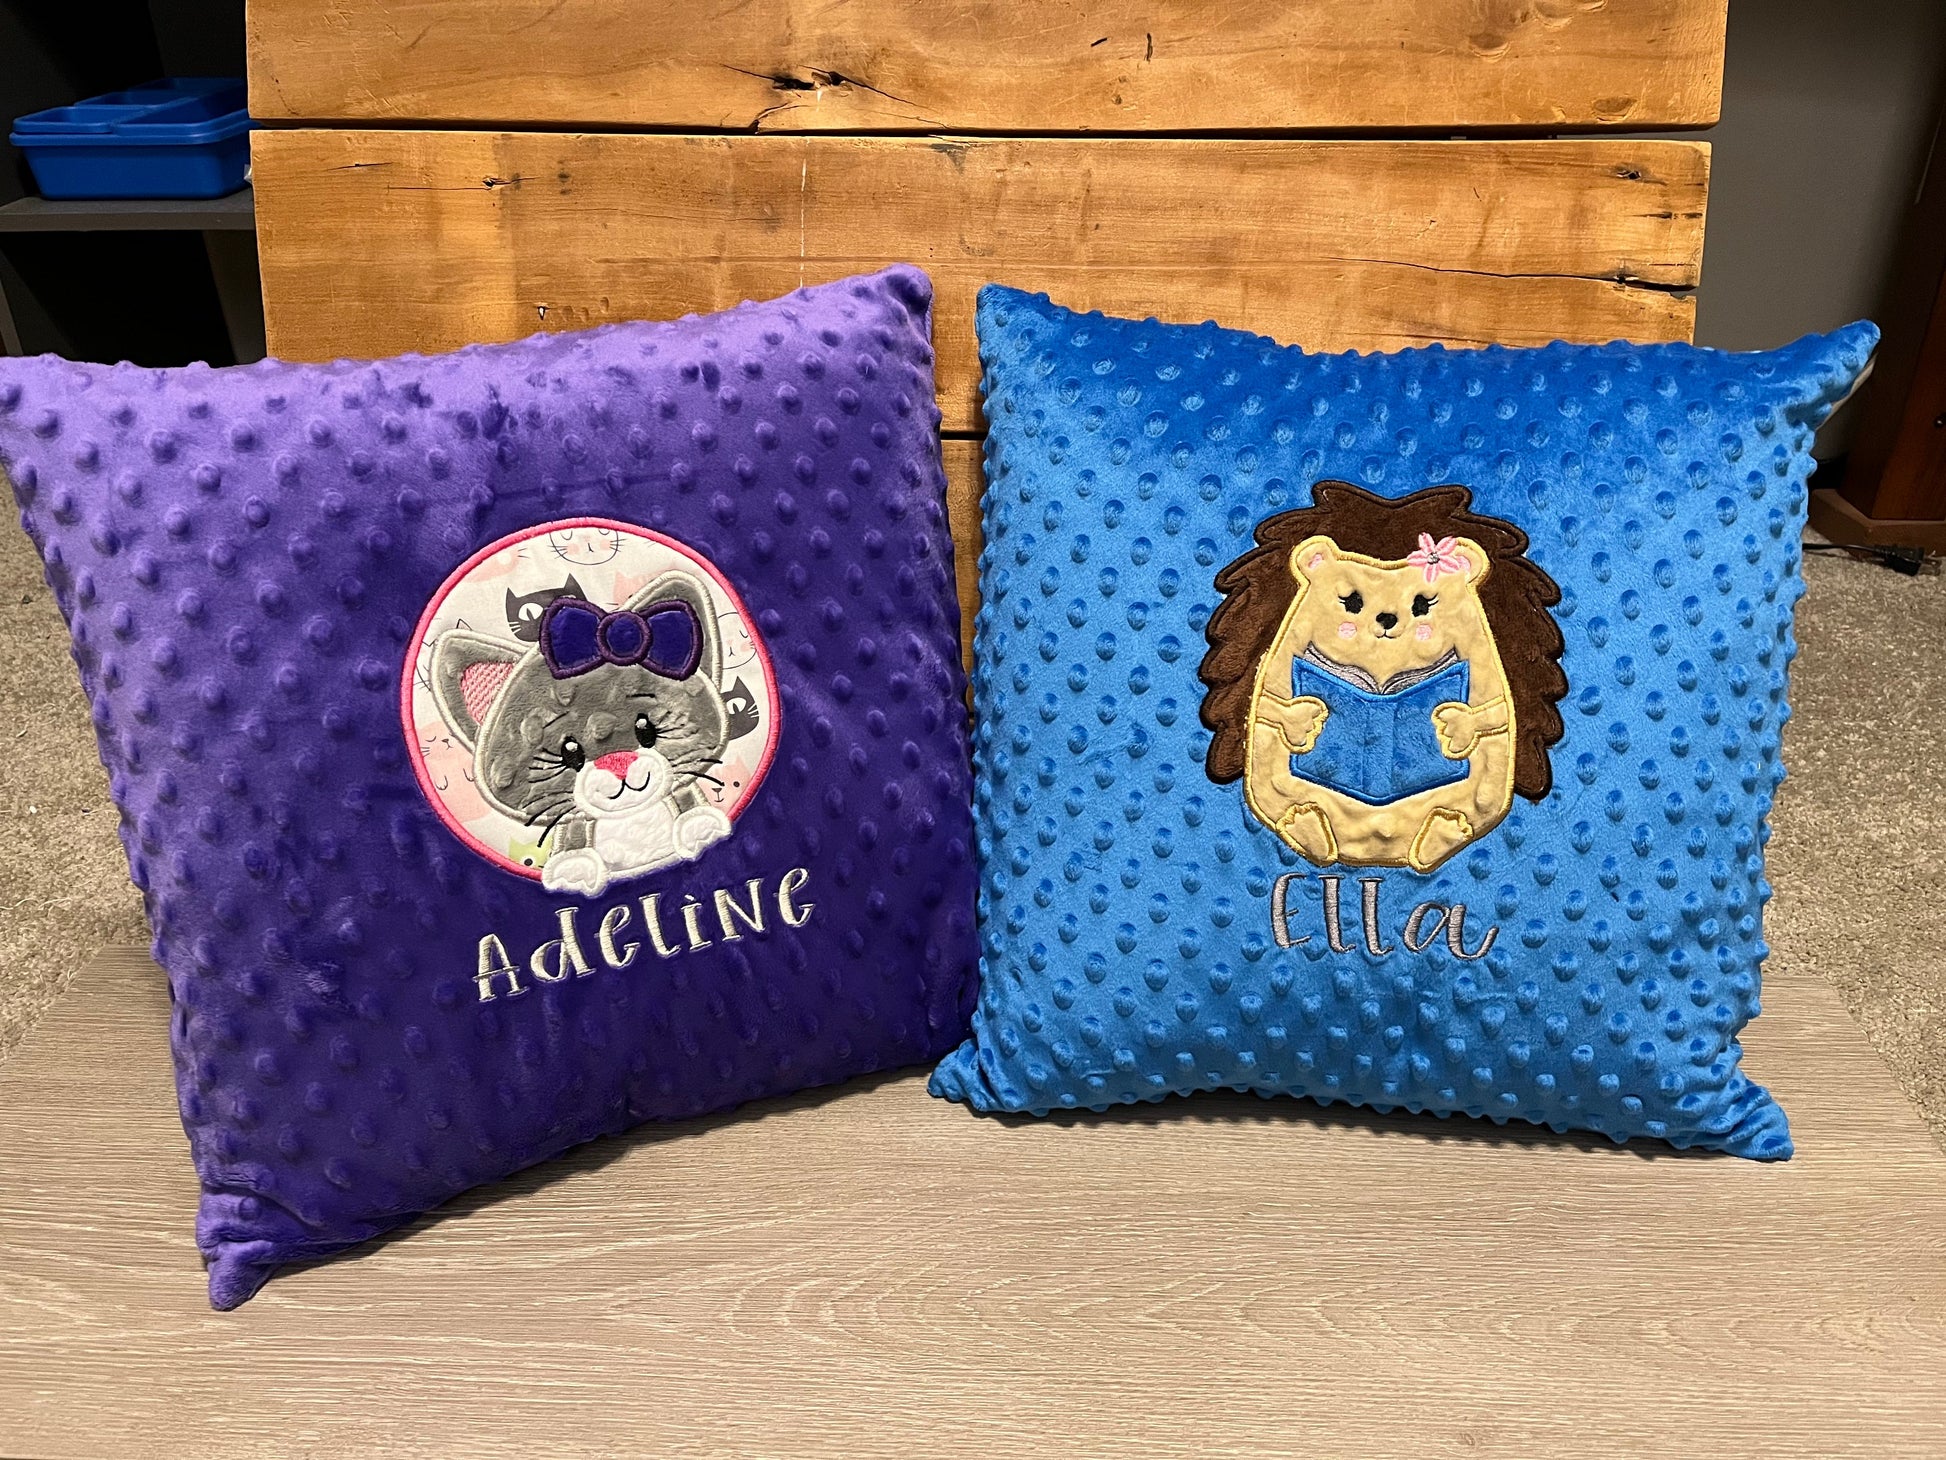 custom cat pillow cover with insert included, shown in purple minky. Blue pillow with hedgehog and name